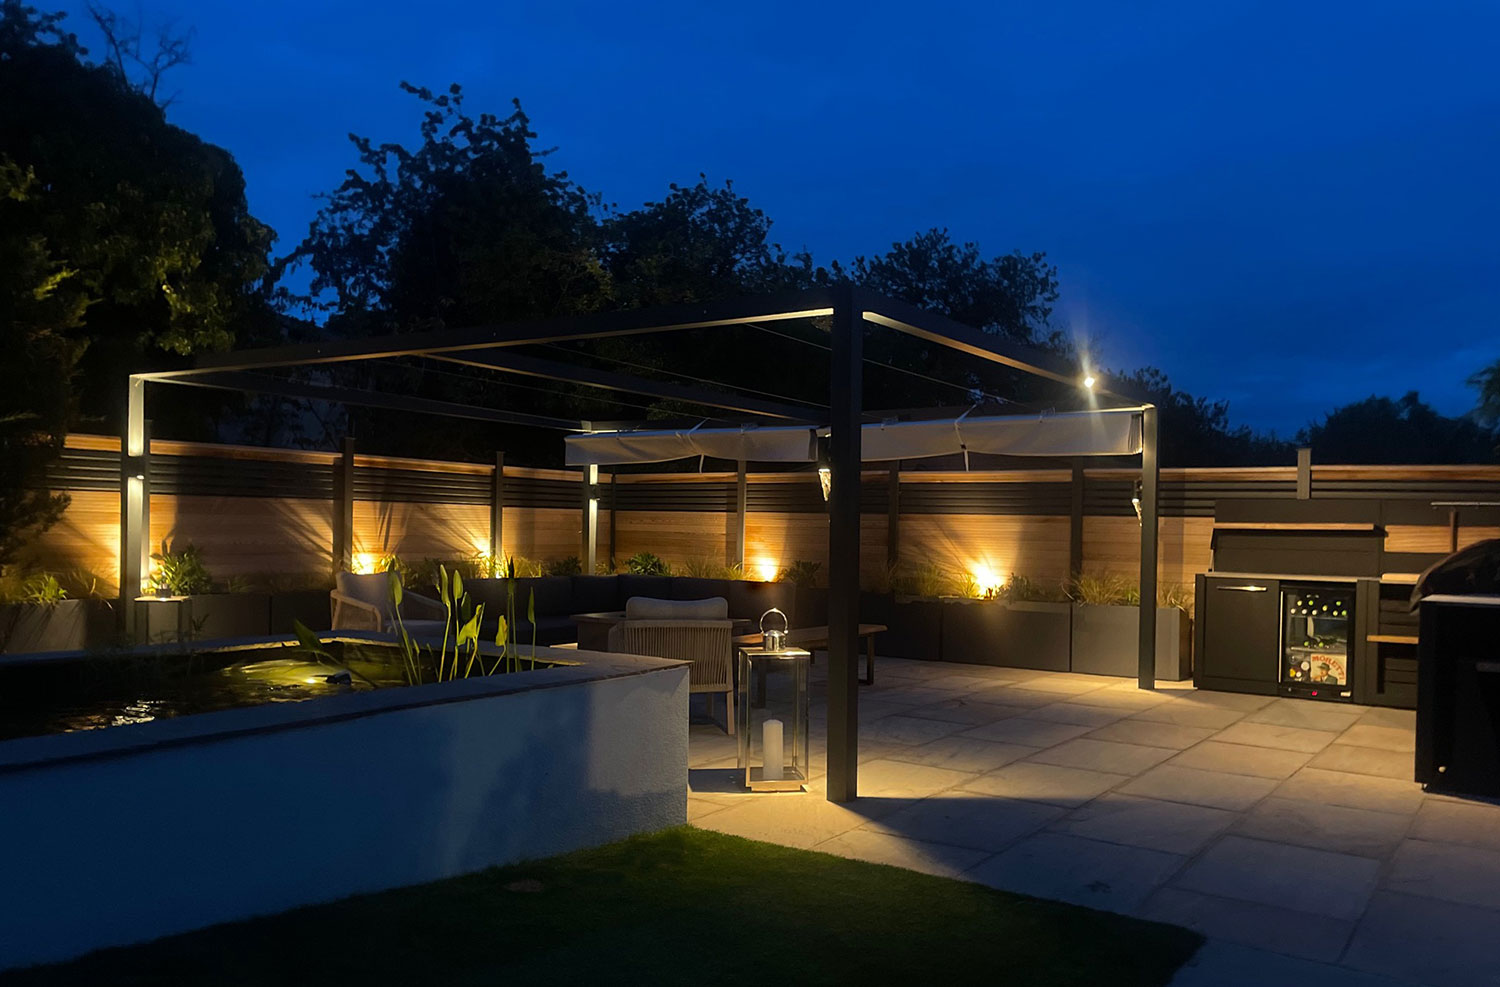 Entertaining into the evening with garden lighting